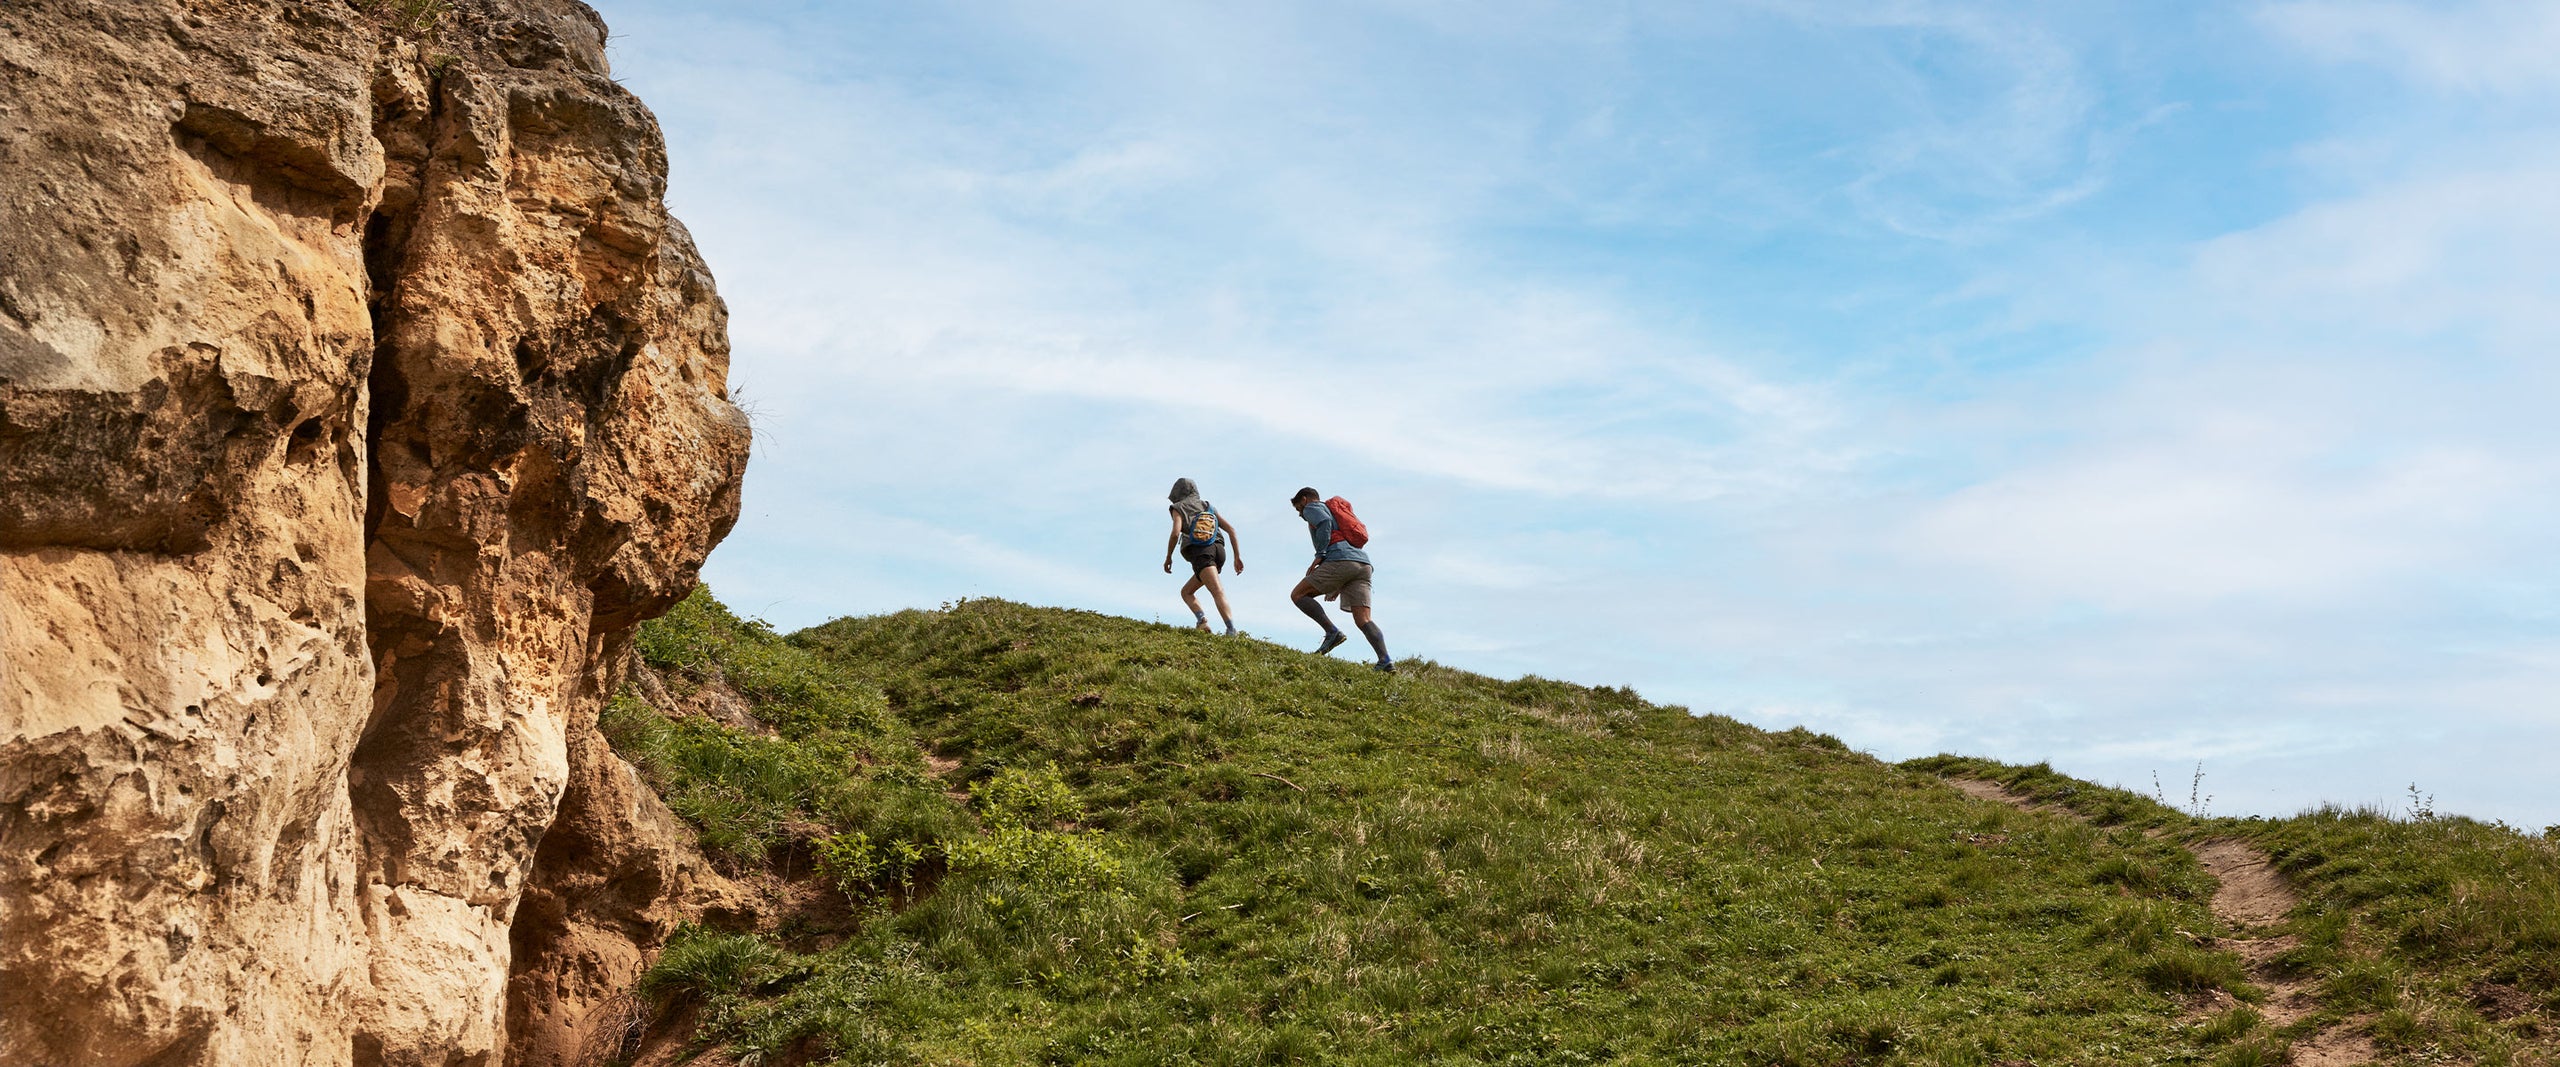 Two people walk uphill through a green pasture.